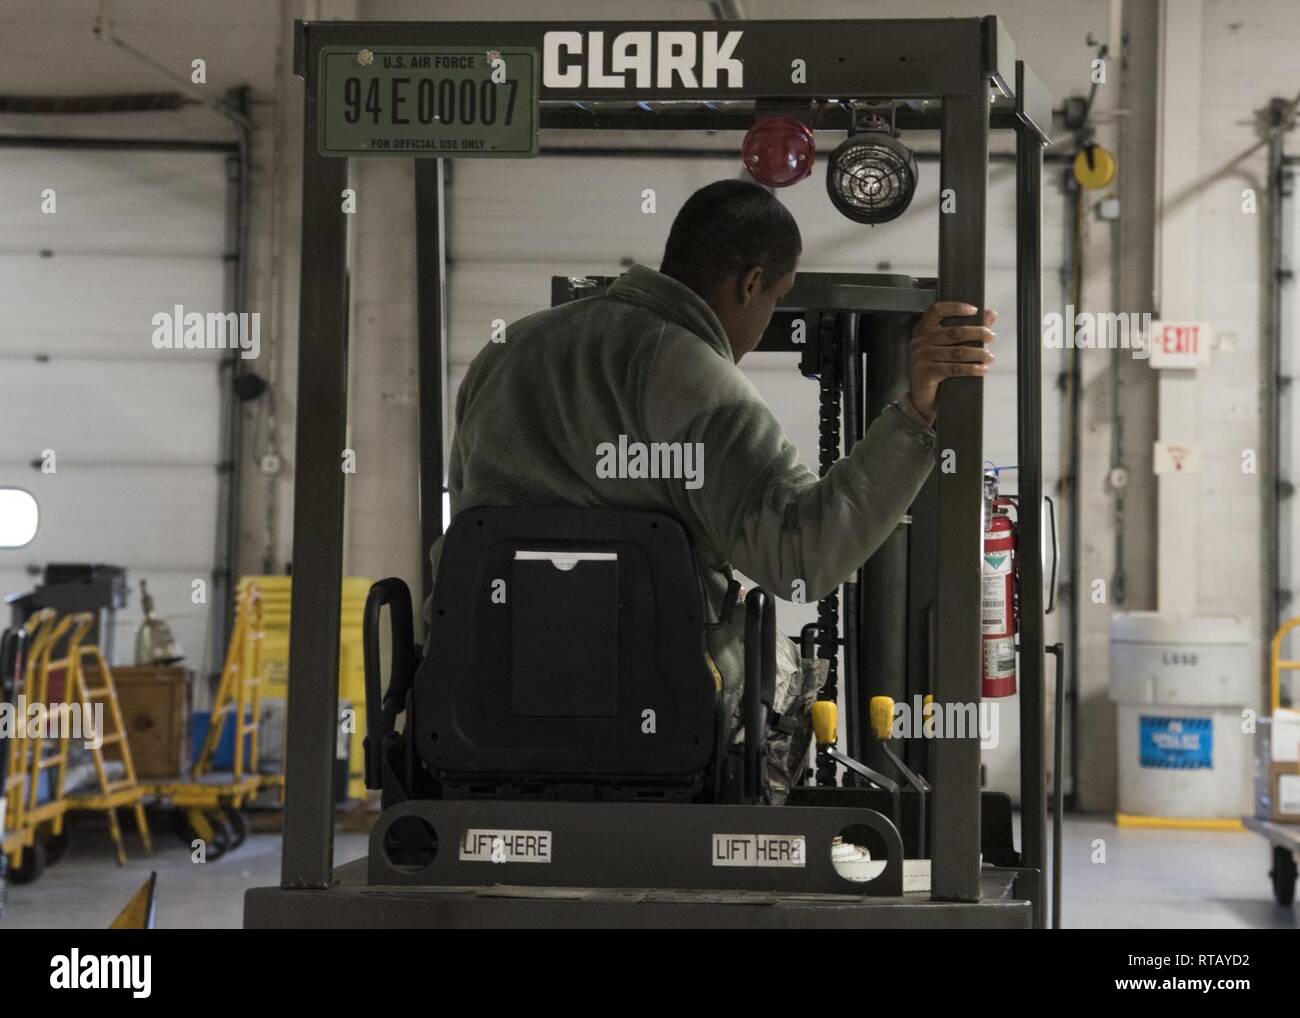 Airman Anthony Lemarc Cole Jr., a traffic management specialist, 108th Logistics Readiness Squadron, parks a forklift in the LRS supply warehouse at Joint Base McGuire-Dix-Lakehurst, N.J., Feb. 4, 2019. In his year and two months of service, Cole said his proudest moment so far was passing his career development course test and becoming a temporary technician within his shop. Stock Photo